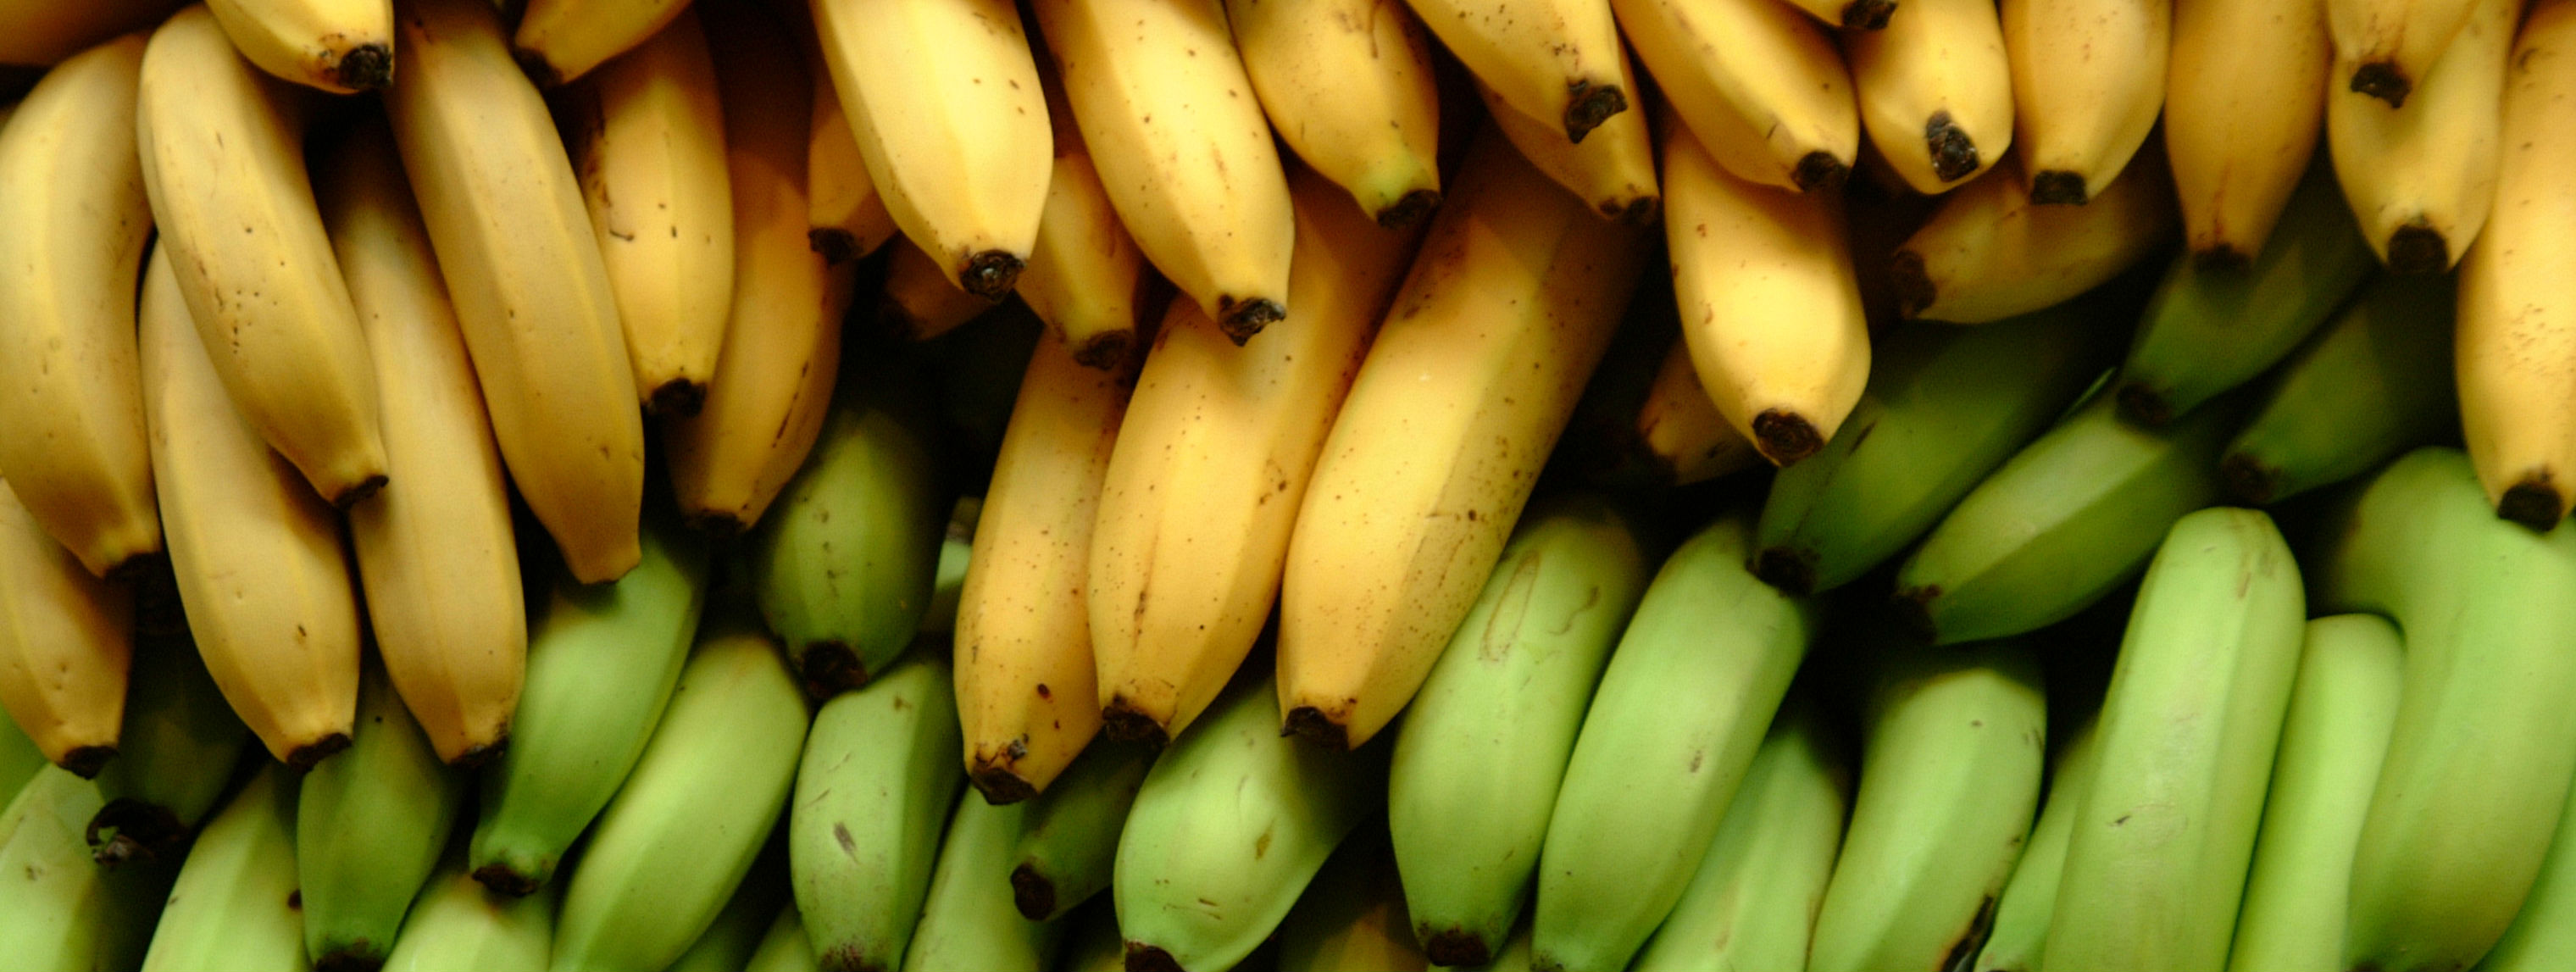 Restoring confidence in the banana industry